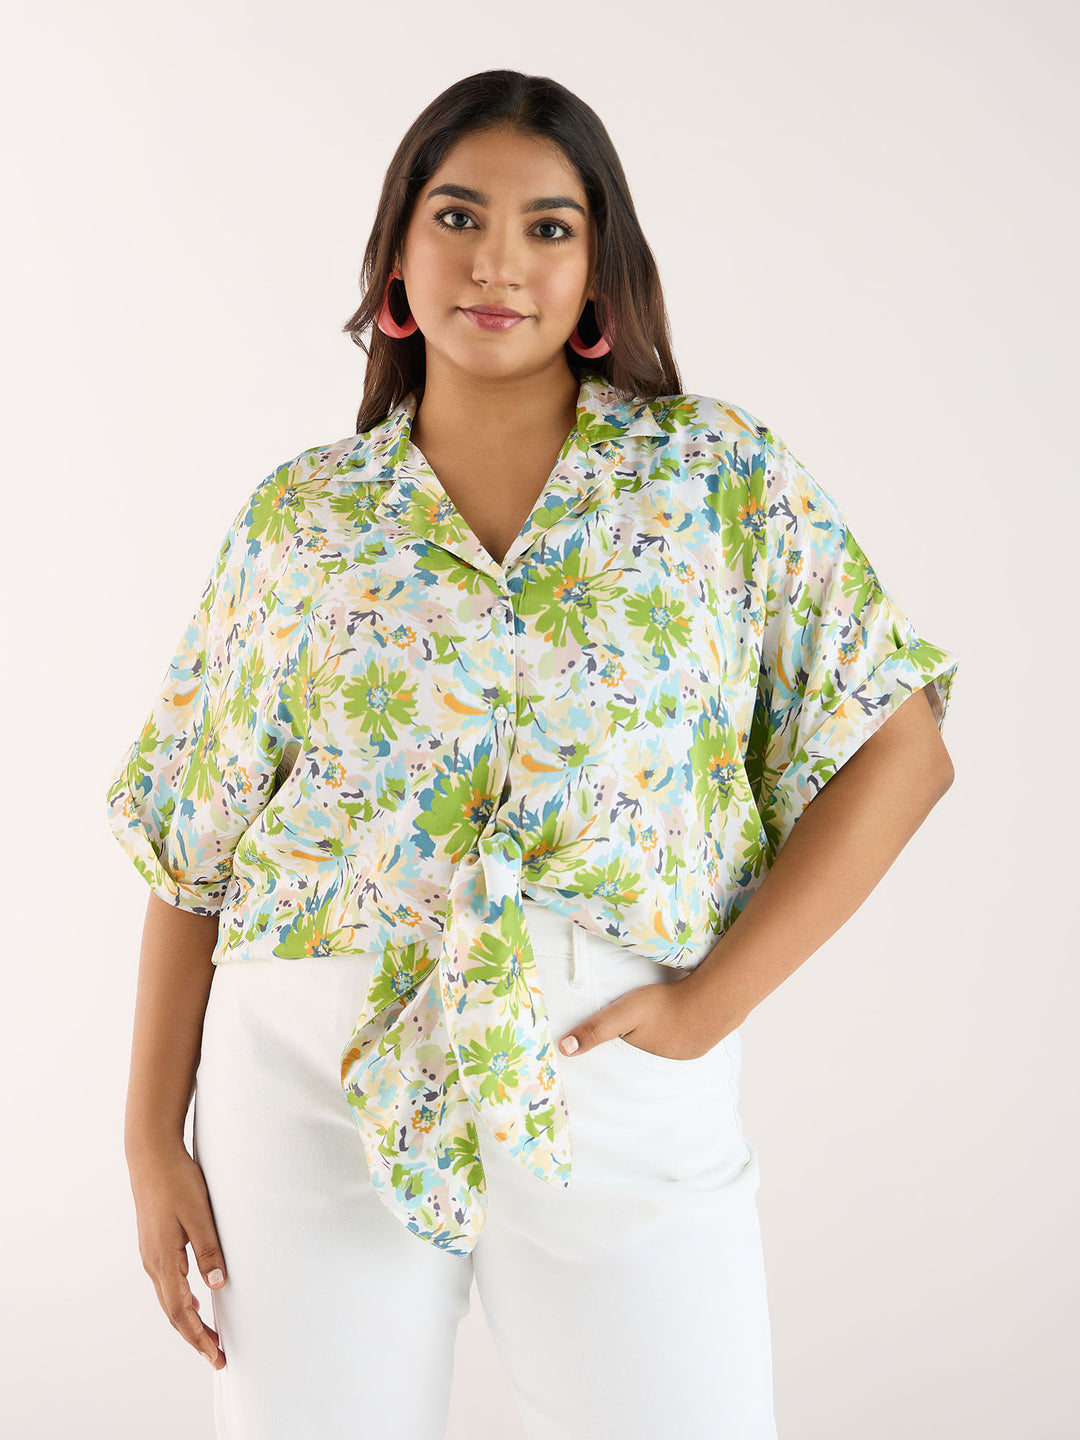 Abstract Floral Printed Top